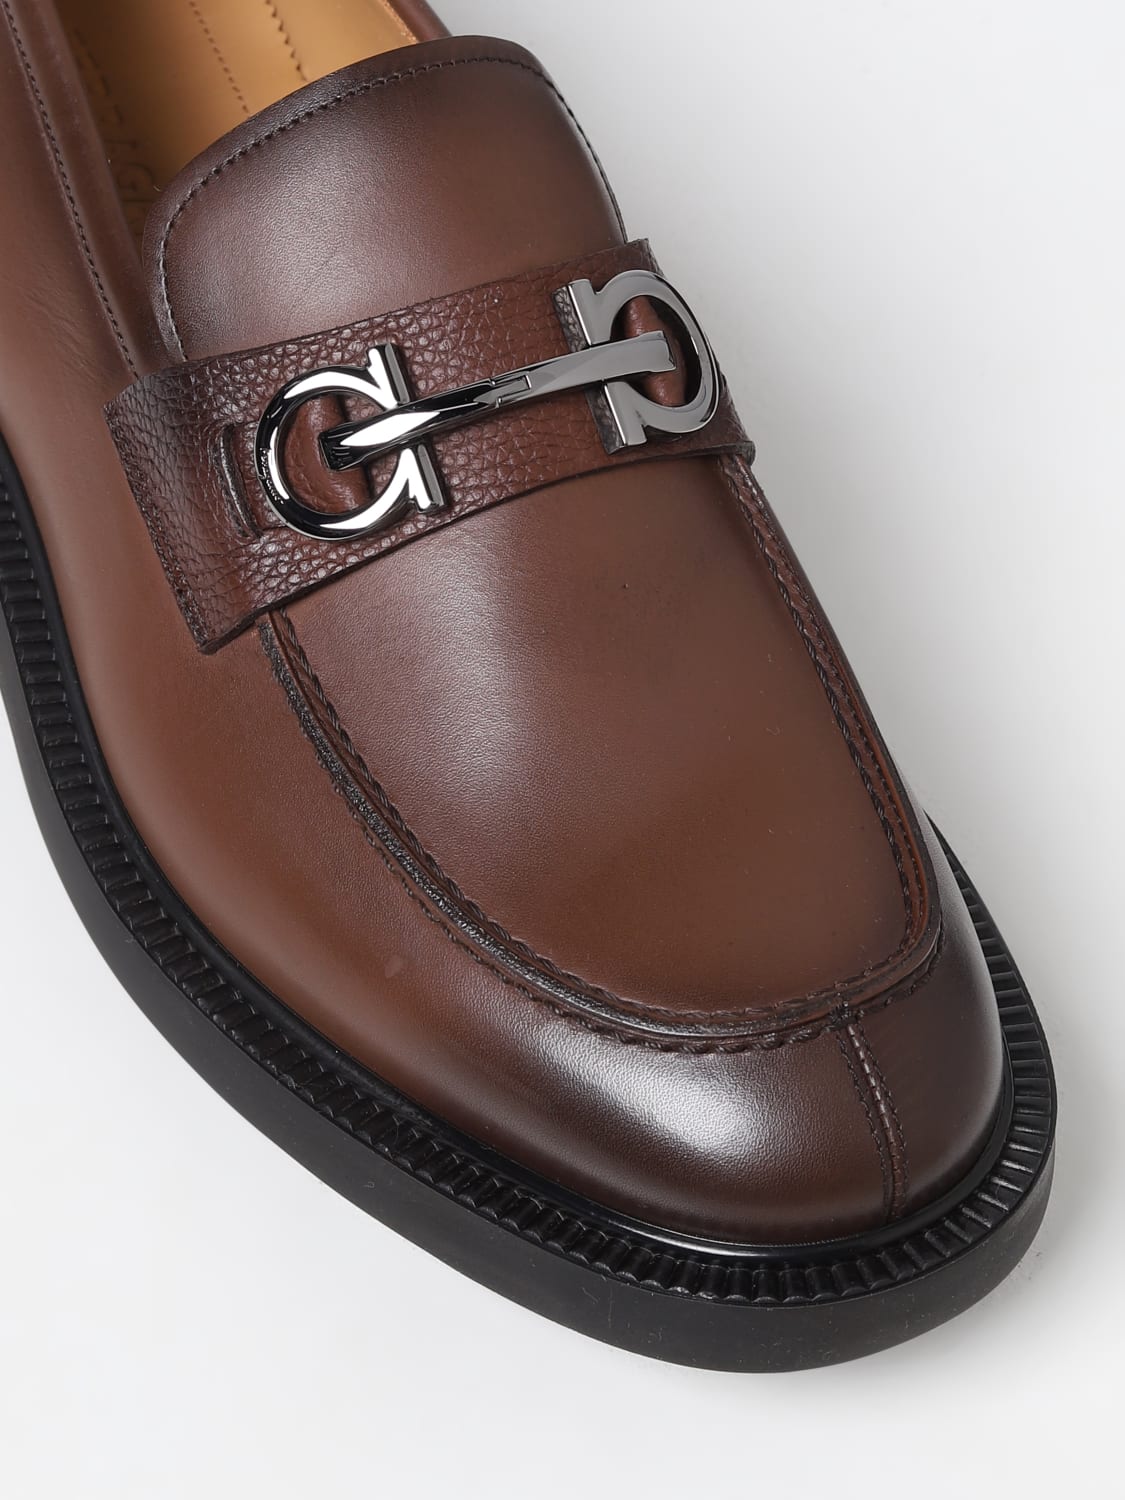 FERRAGAMO: Galles moccasins in leather - Brown  FERRAGAMO loafers 021141  762335 online at